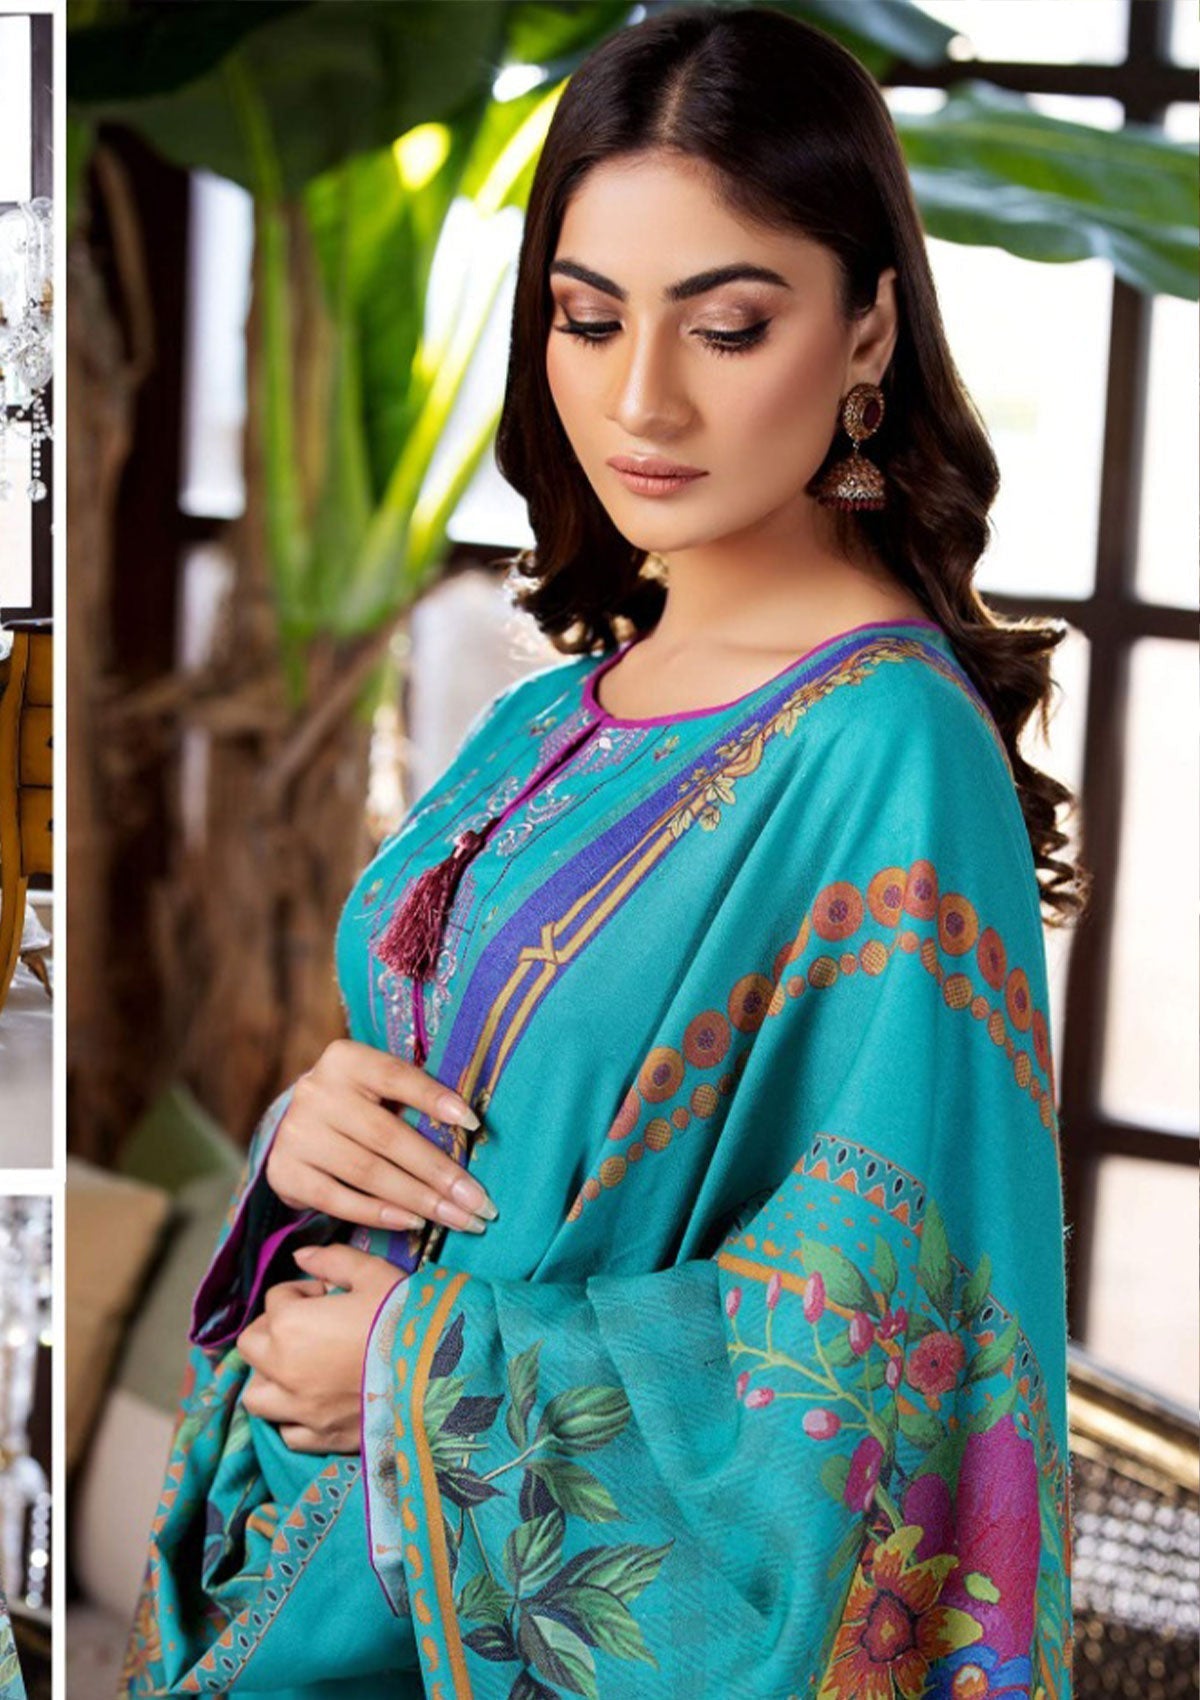 Winter Collection - Noor Jahan - Mina Hassan - D#7 available at Saleem Fabrics Traditions